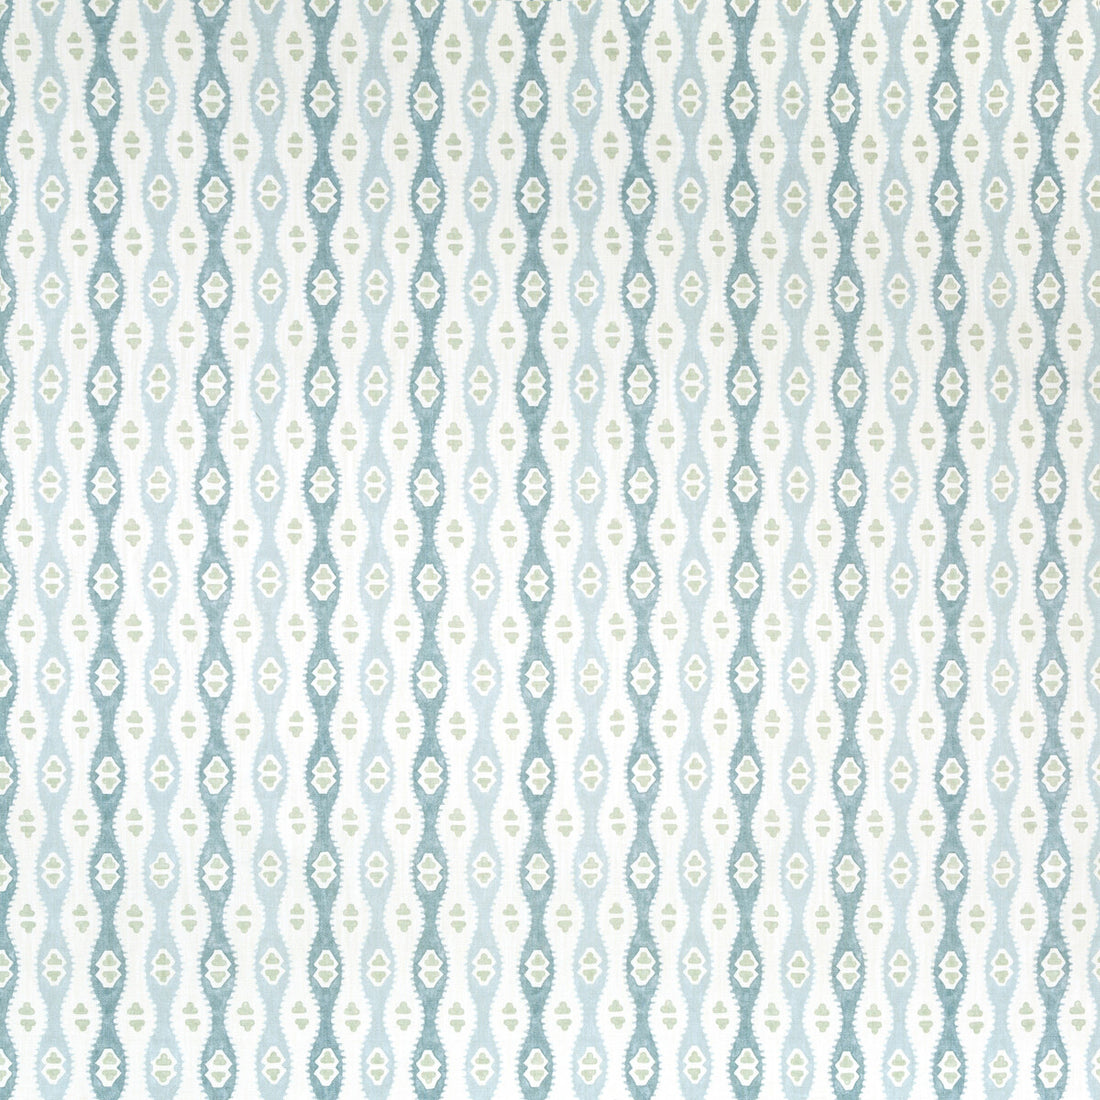 Elba Print fabric in chambray color - pattern 2020187.135.0 - by Lee Jofa in the Avondale collection